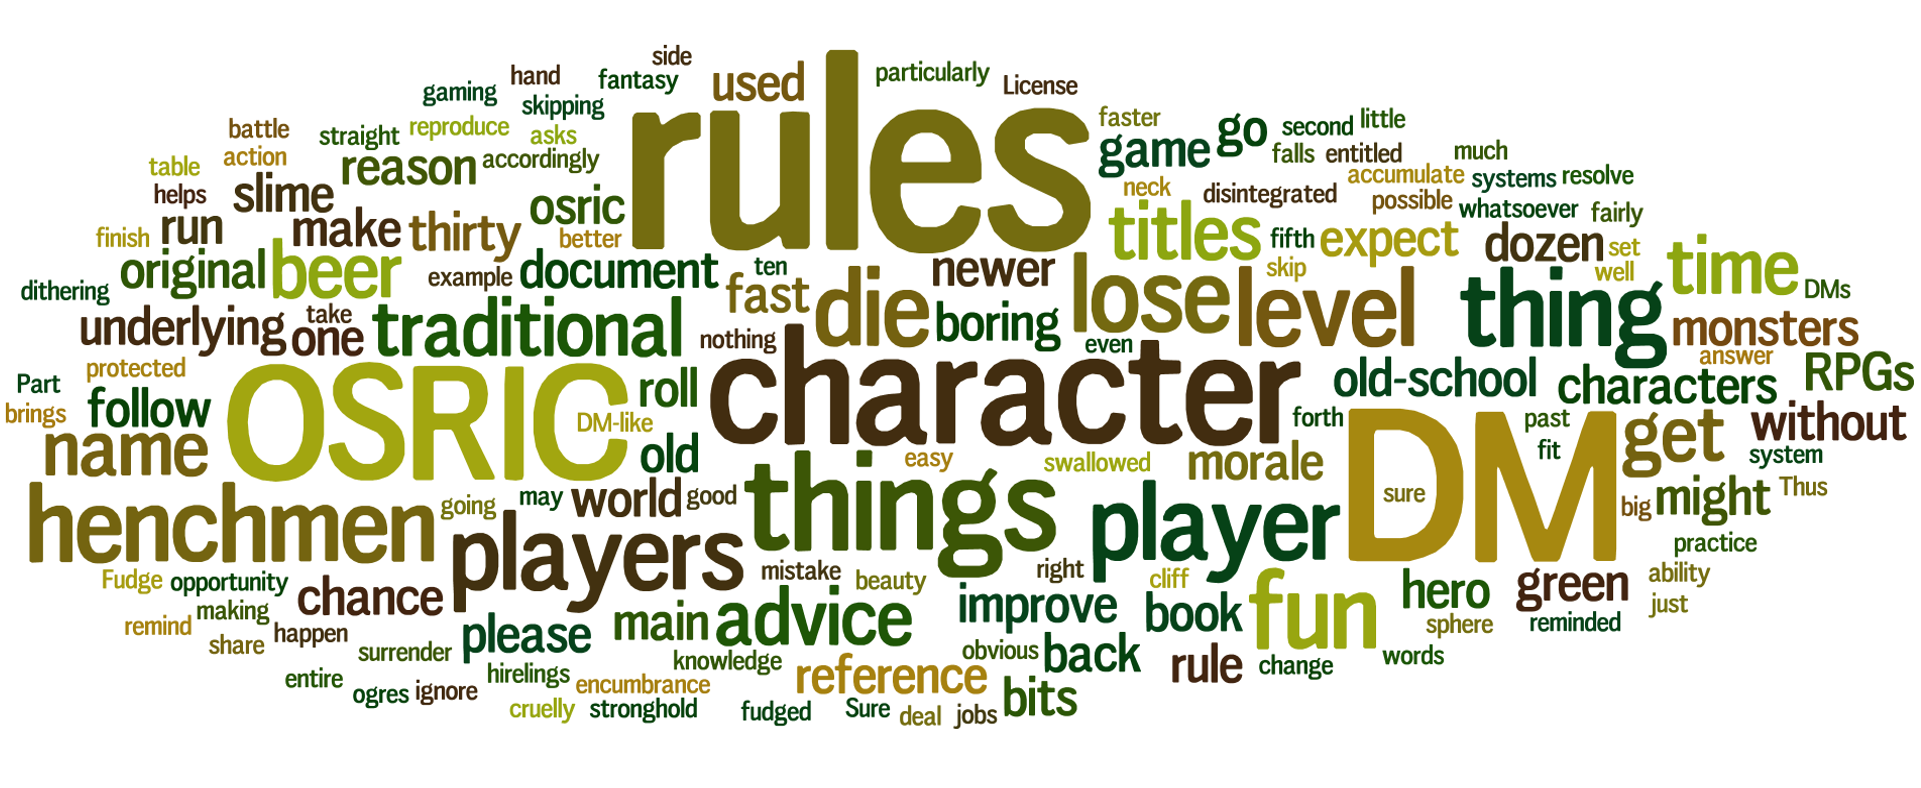 Wordle1.png  by rredmond